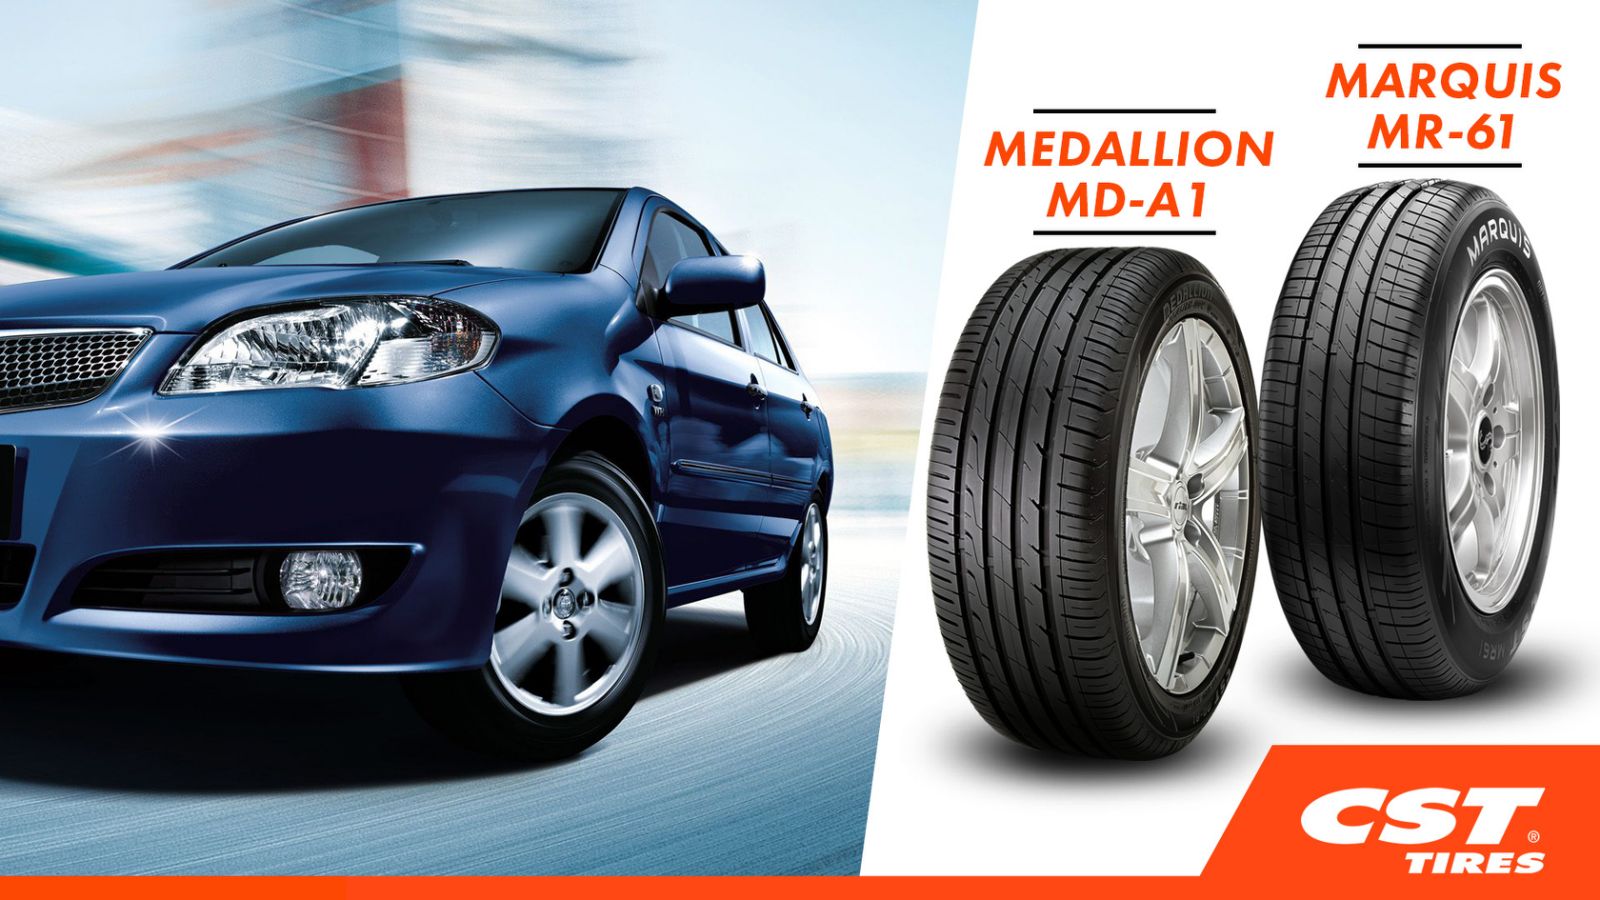 Choose greater, smarter and safer mobility with premium passenger car tires